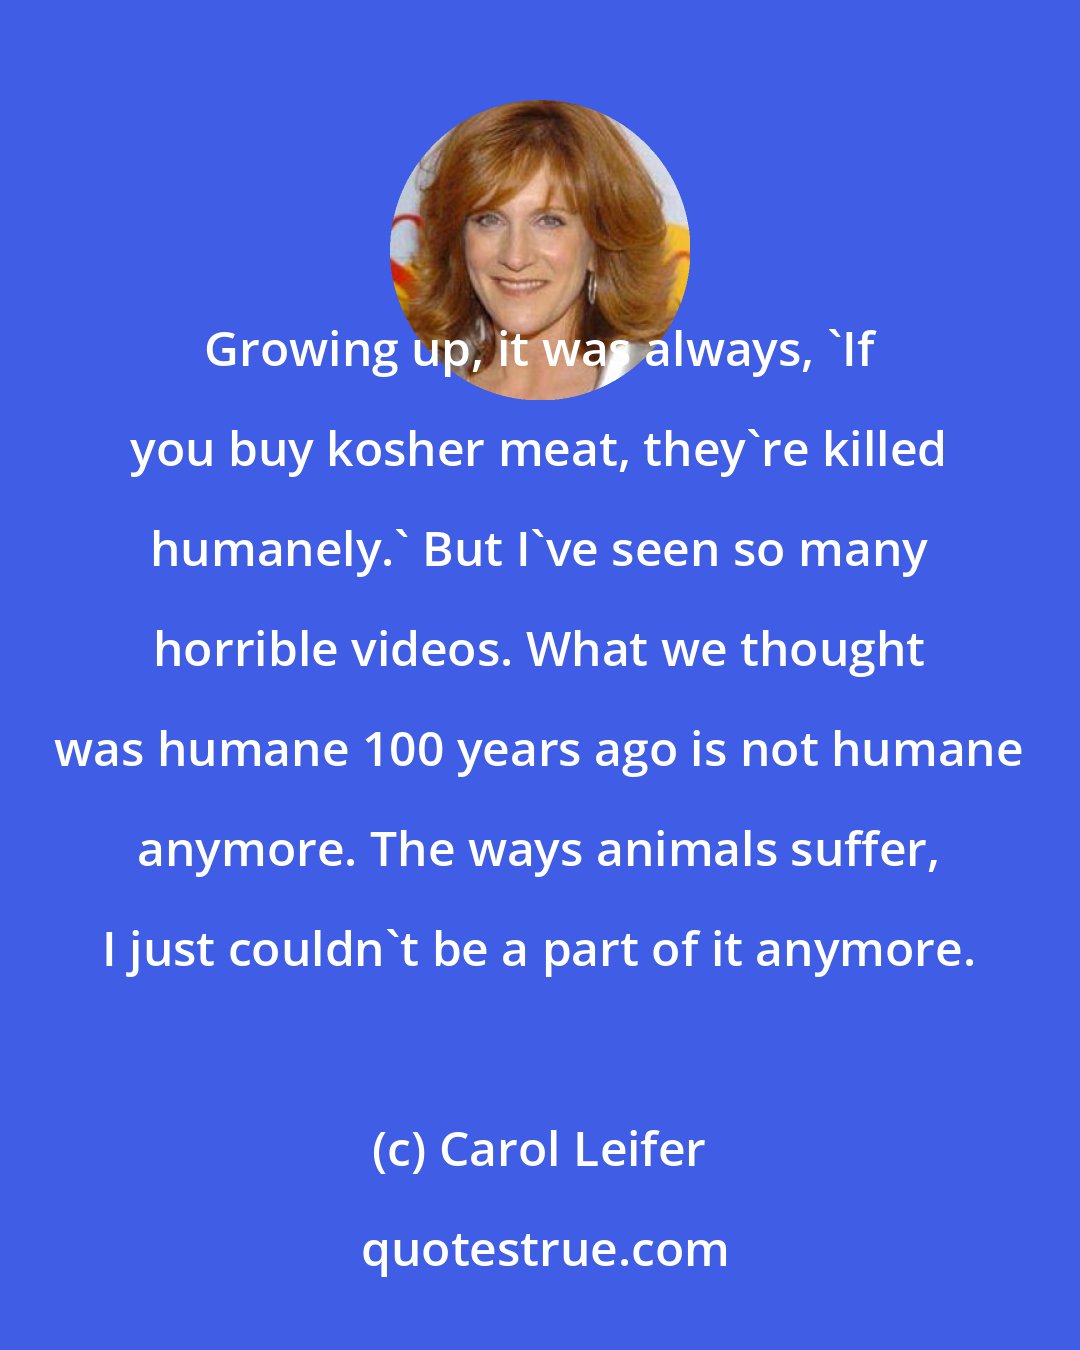 Carol Leifer: Growing up, it was always, 'If you buy kosher meat, they're killed humanely.' But I've seen so many horrible videos. What we thought was humane 100 years ago is not humane anymore. The ways animals suffer, I just couldn't be a part of it anymore.